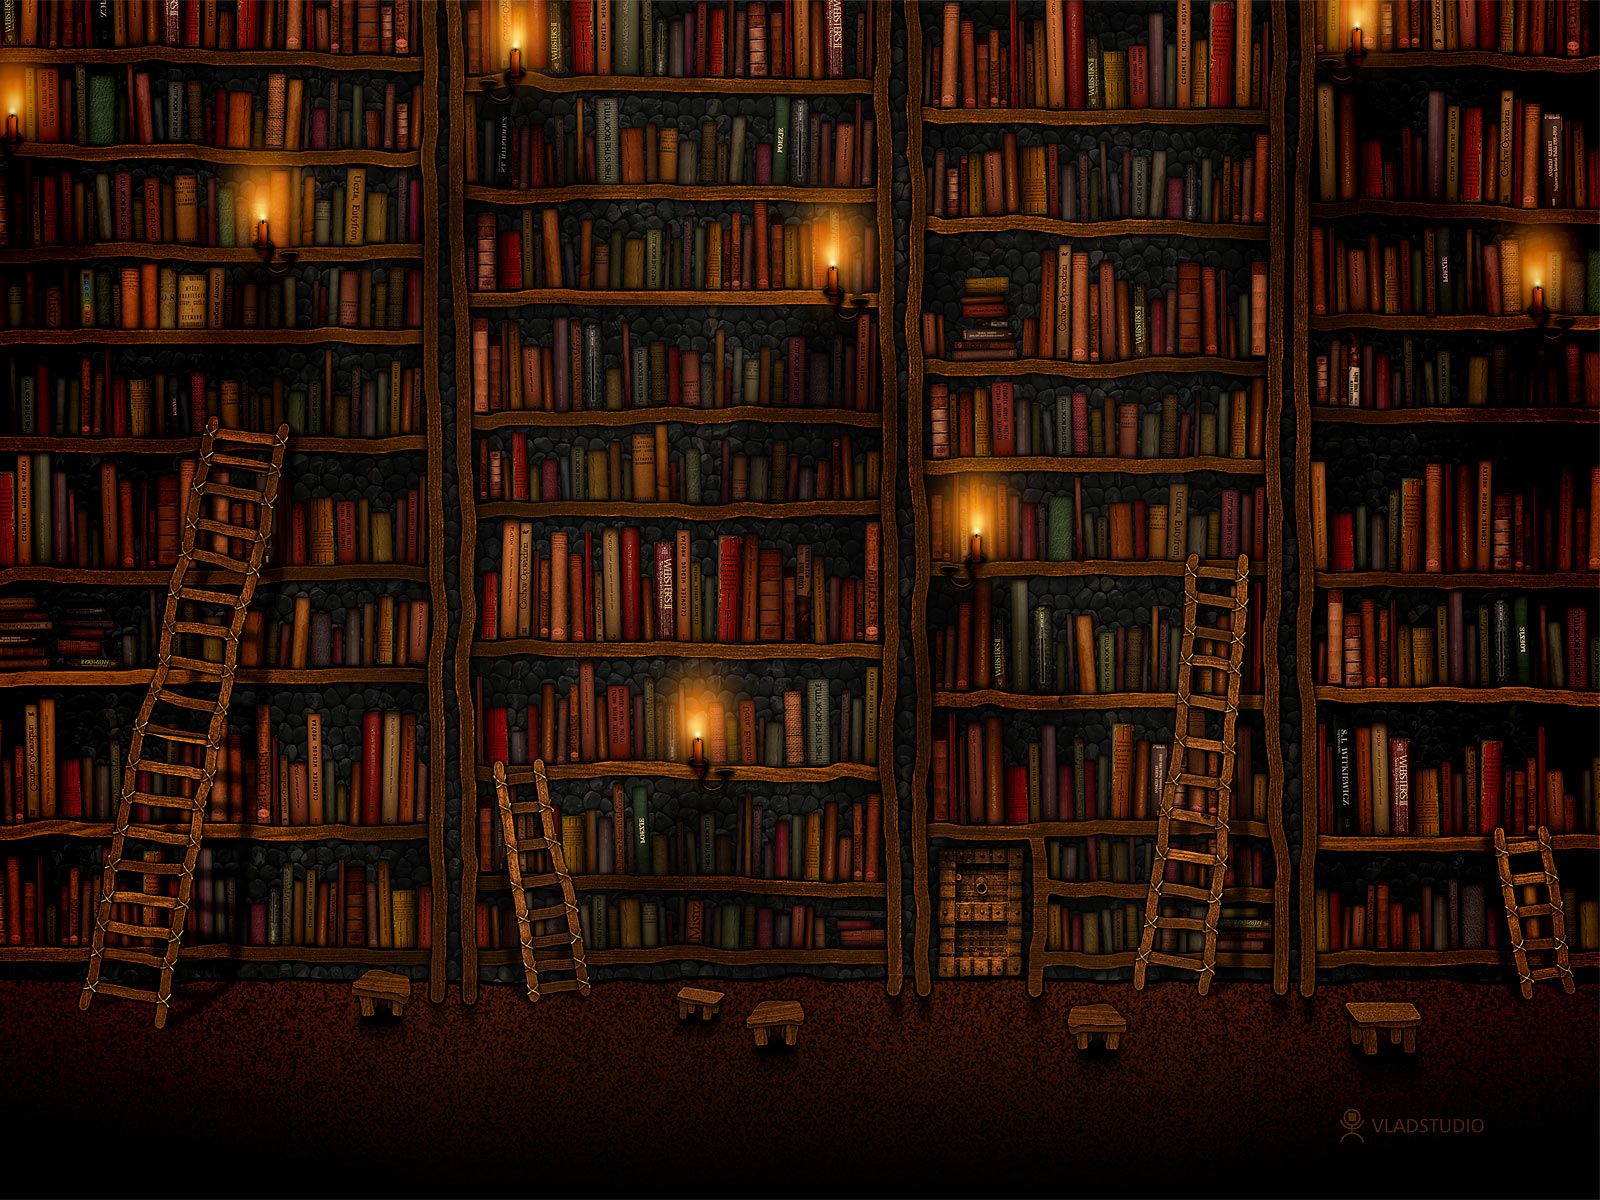 Giant library night wallpaper 1600x1200. Hogwarts library, Library aesthetic, Book background